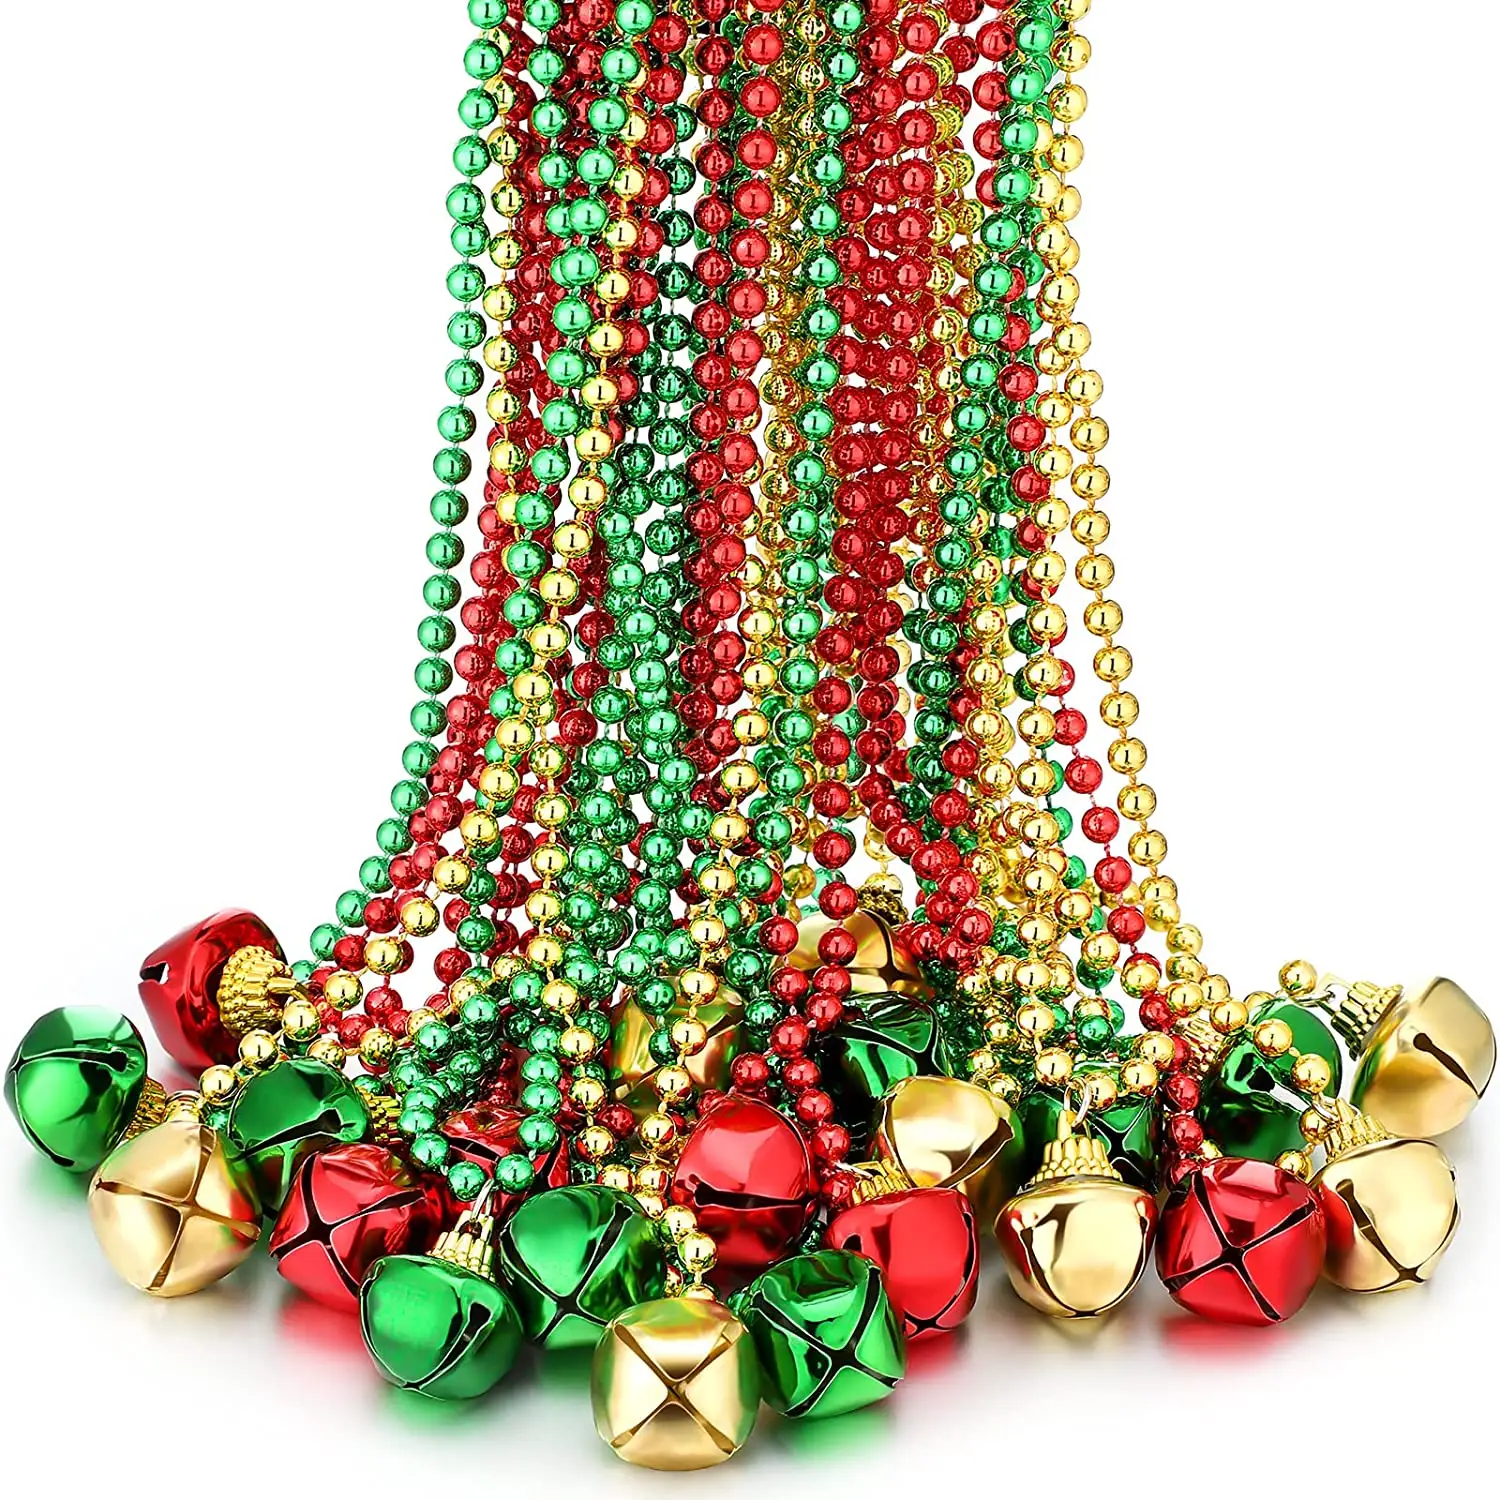 24 Pieces Christmas Jingle Bell Necklaces Jingle Bell Metallic Beads Pendant Necklaces Party Decor for Christmas Party